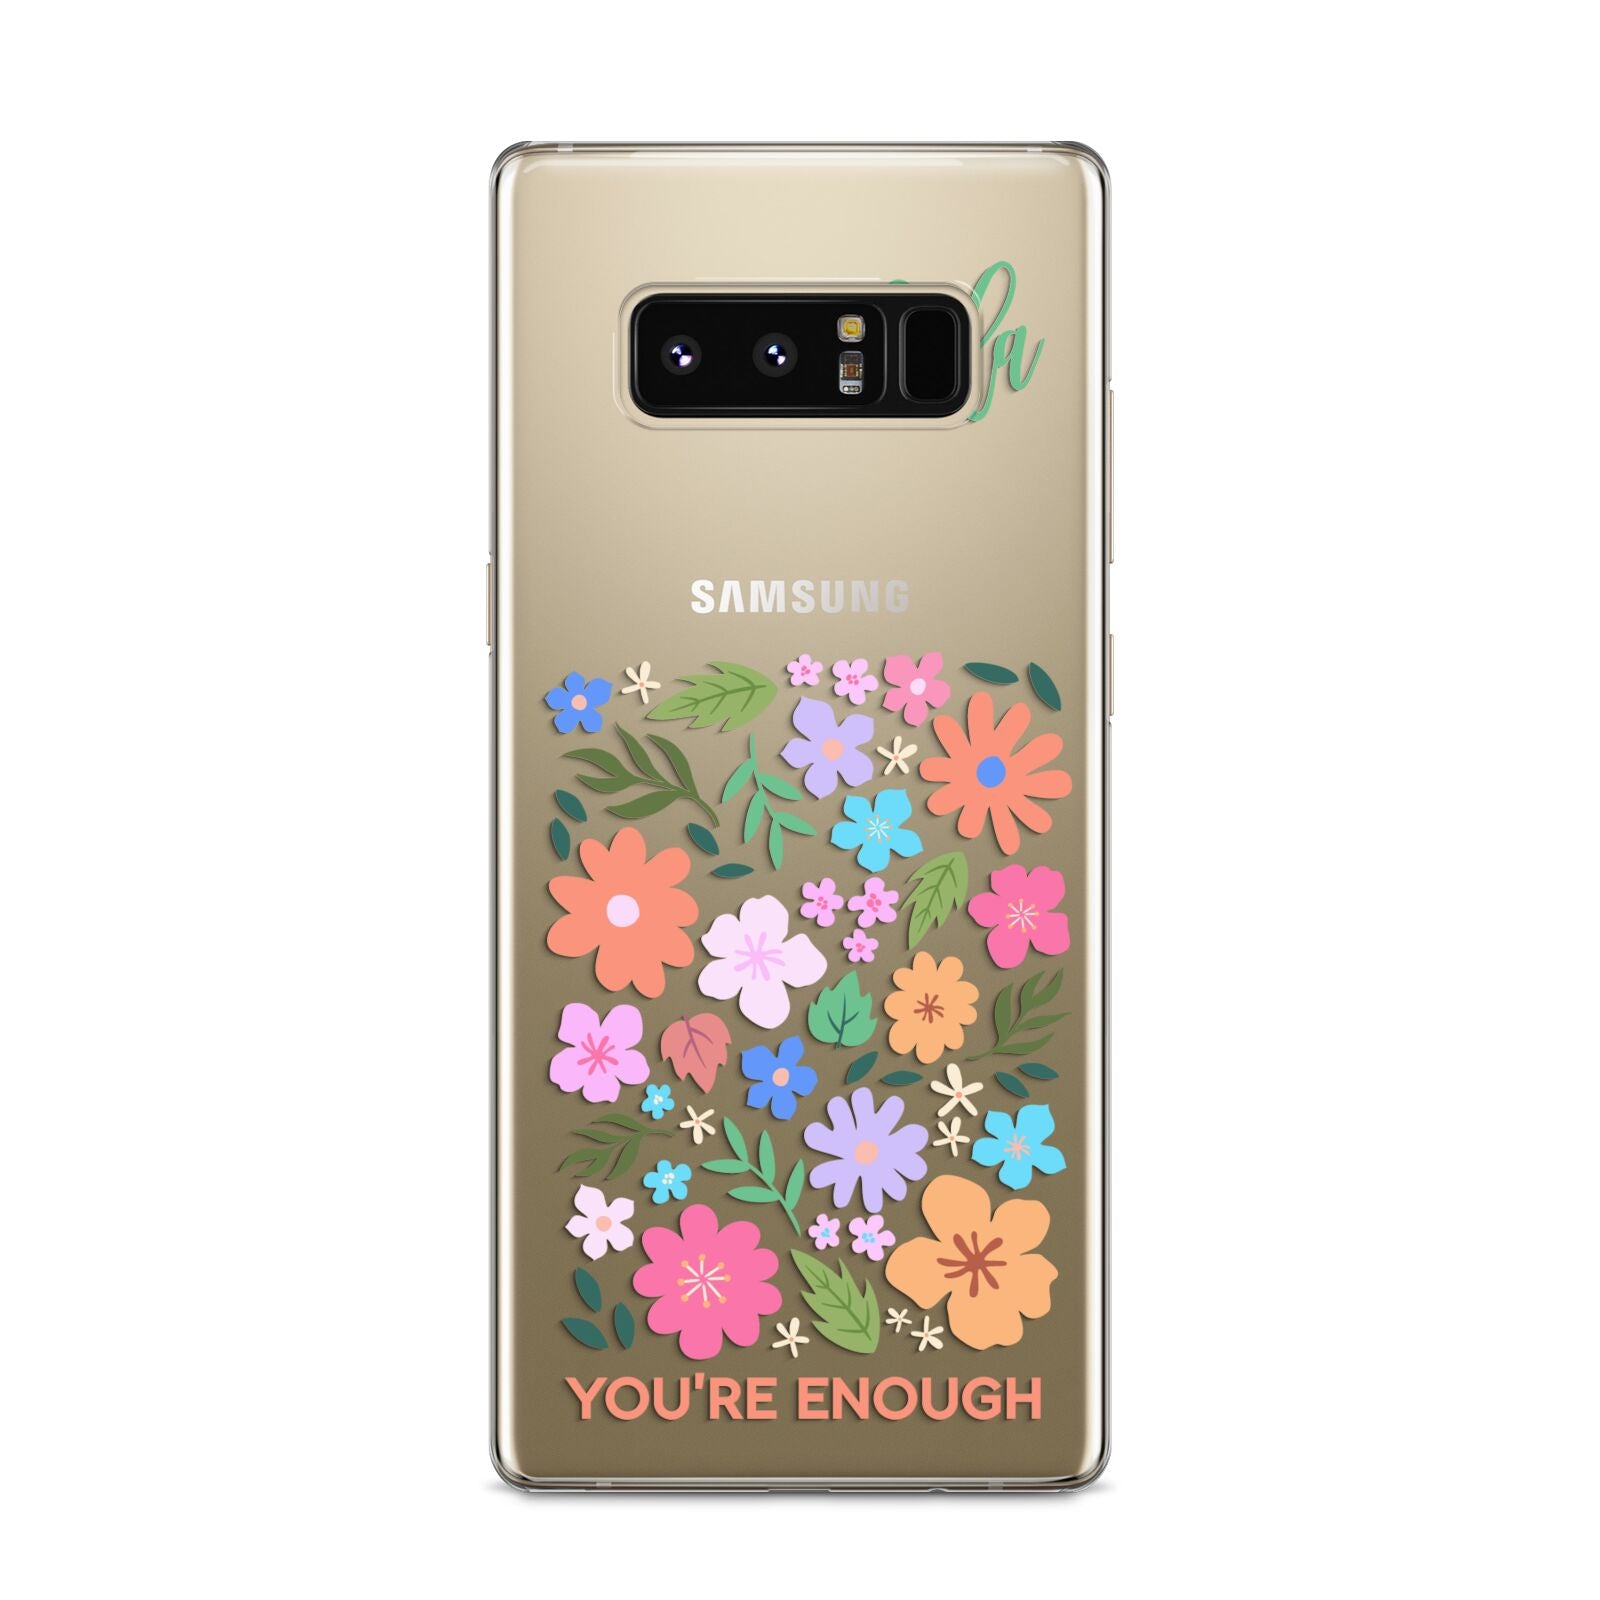 Floral Poster Samsung Galaxy S8 Case